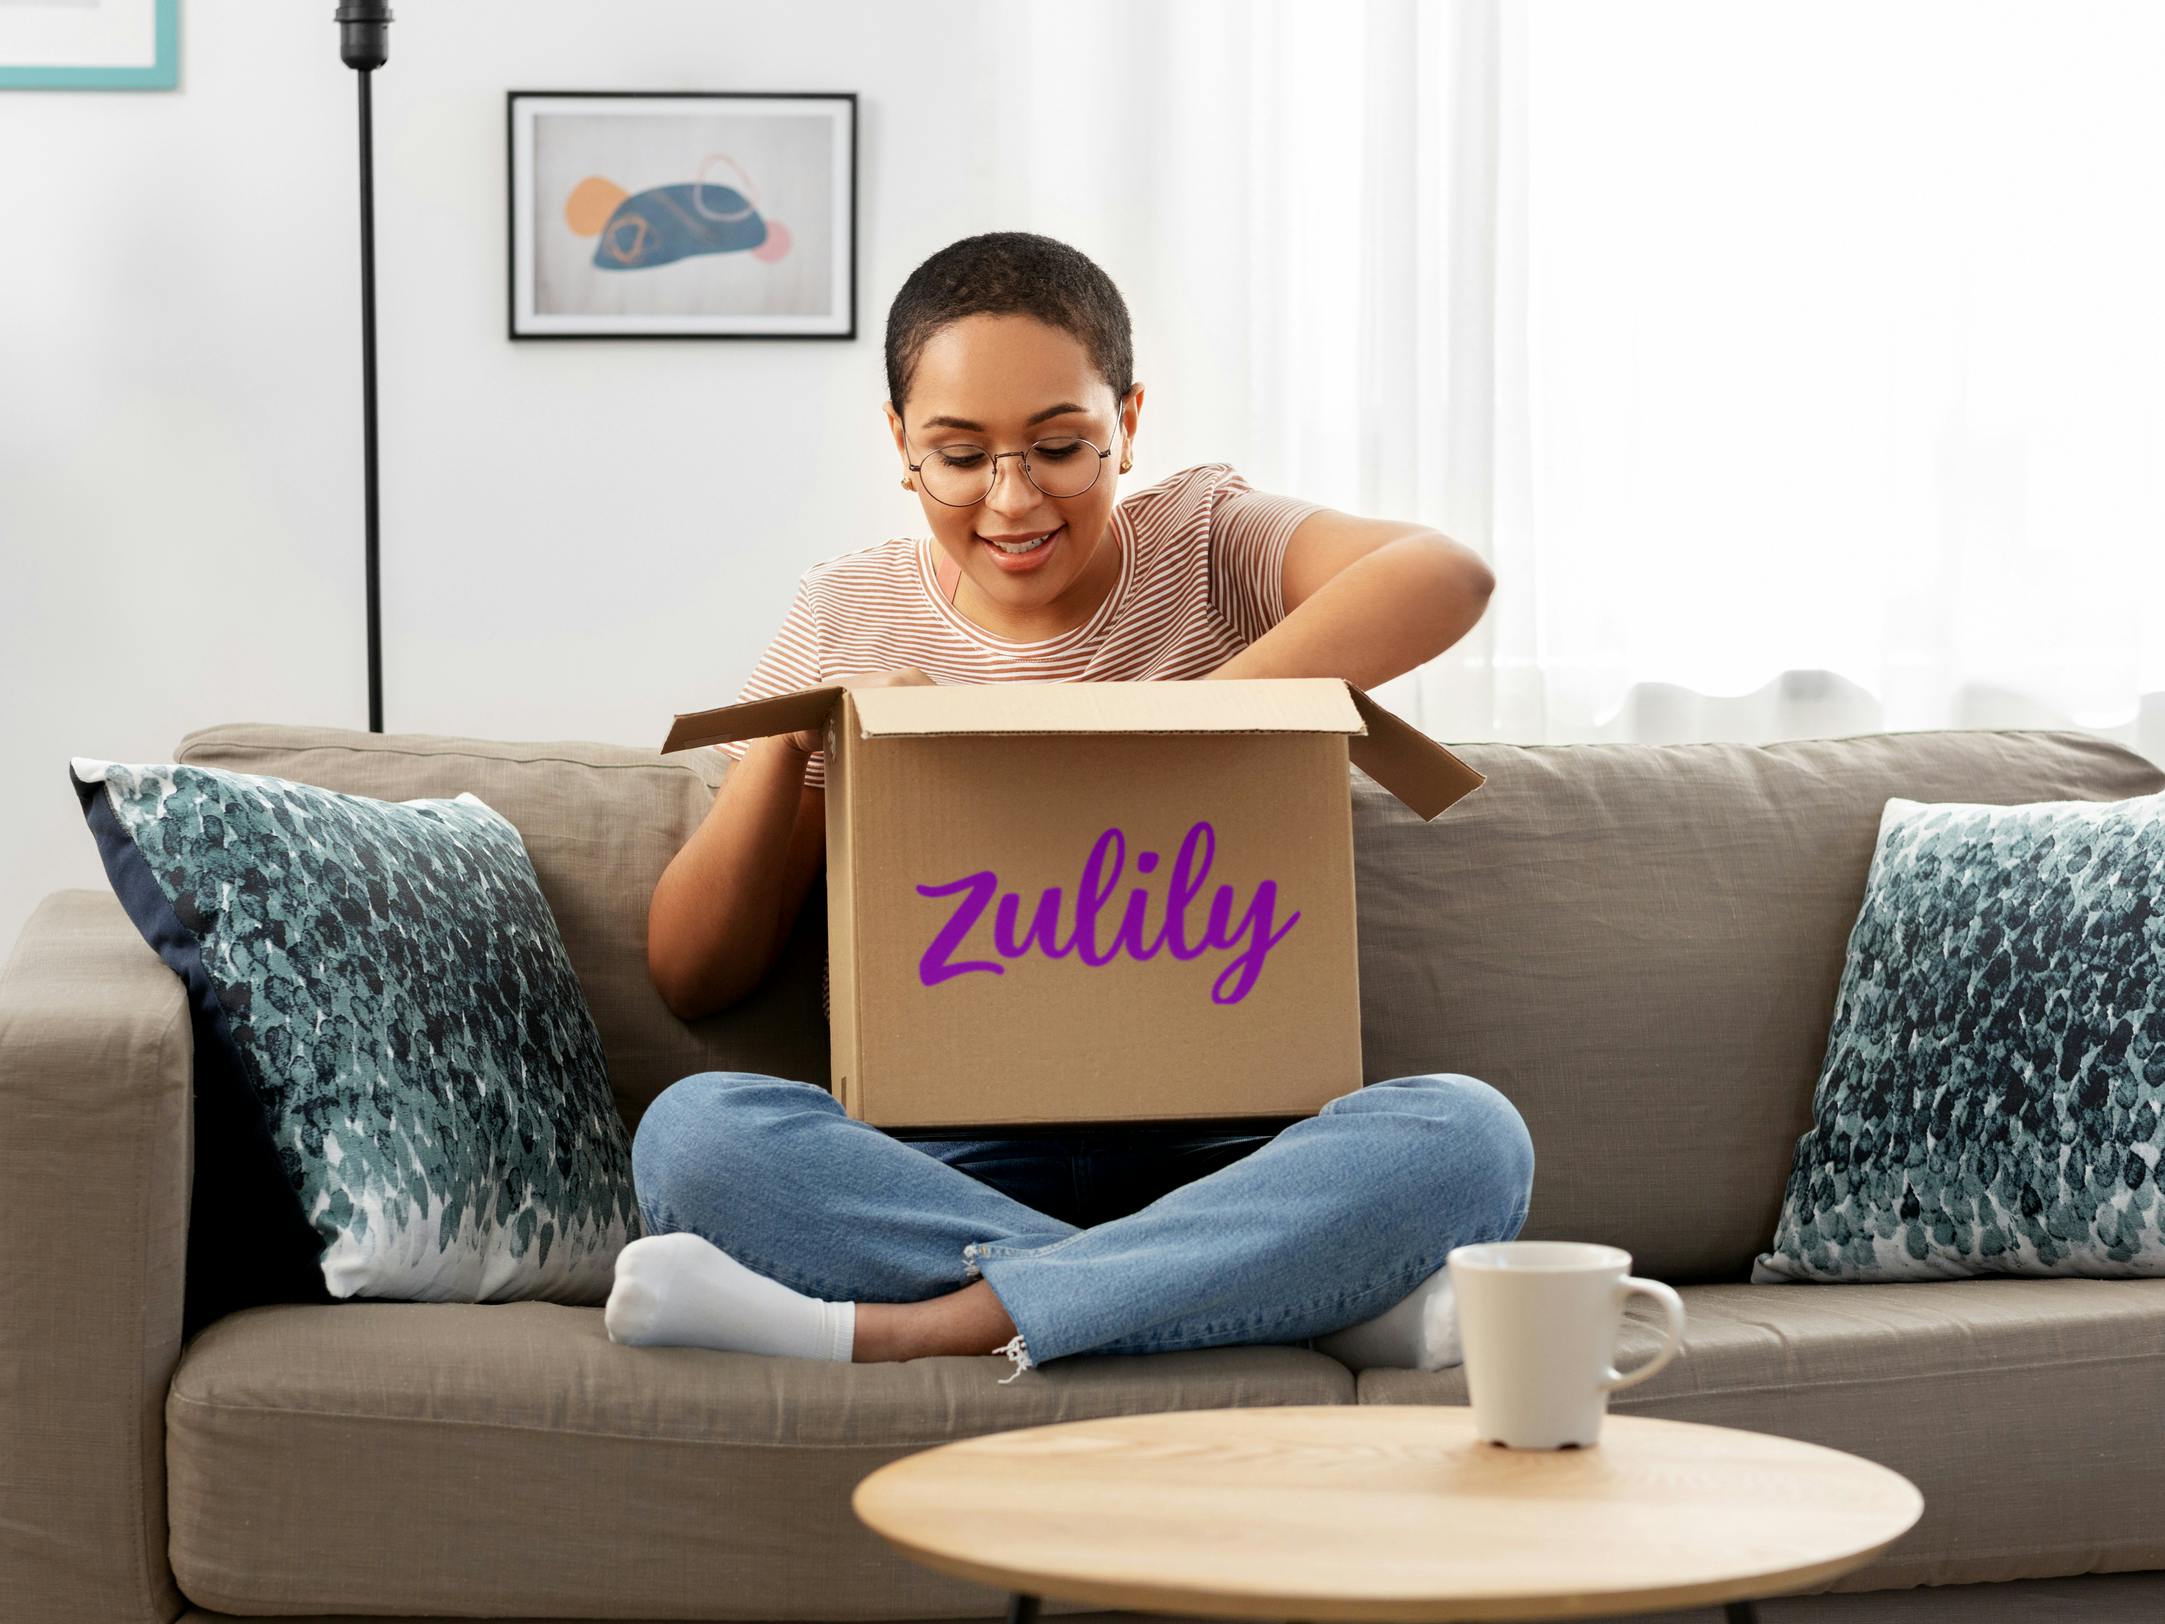 A person opening a Zulily box while sitting on a couch